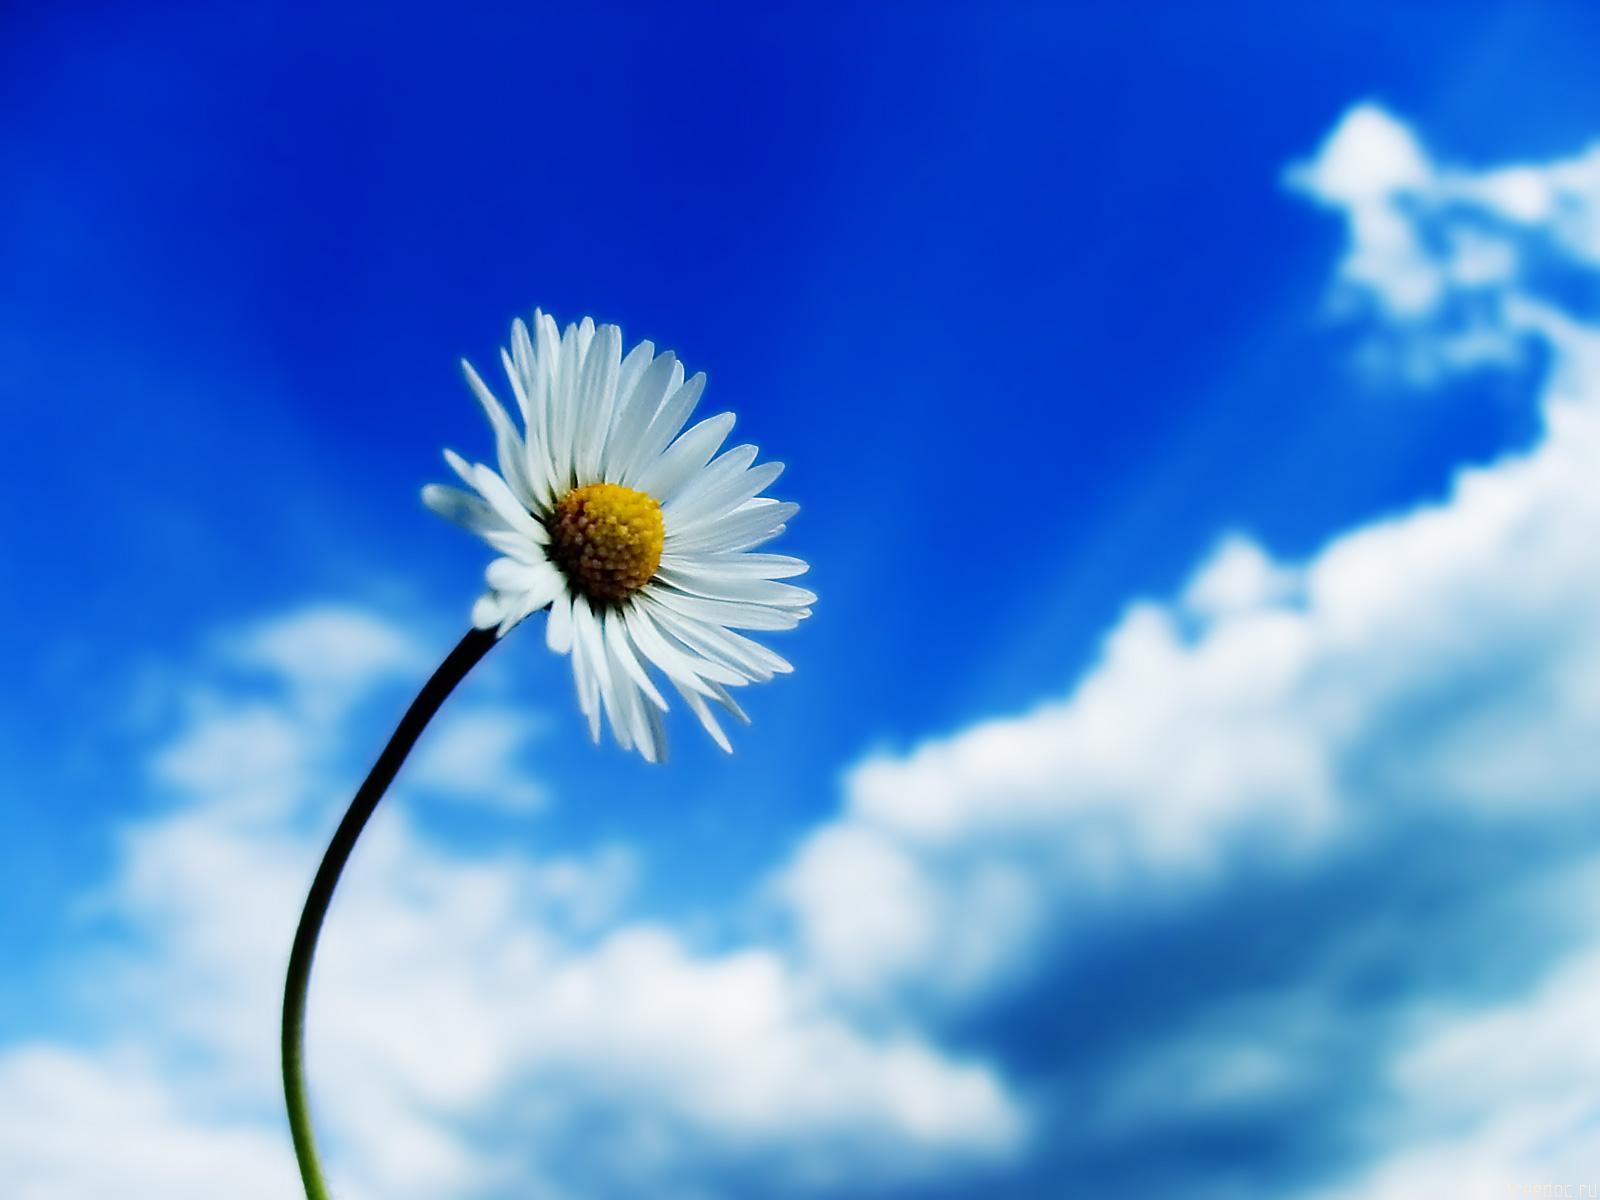 flower wallpapers sky nature